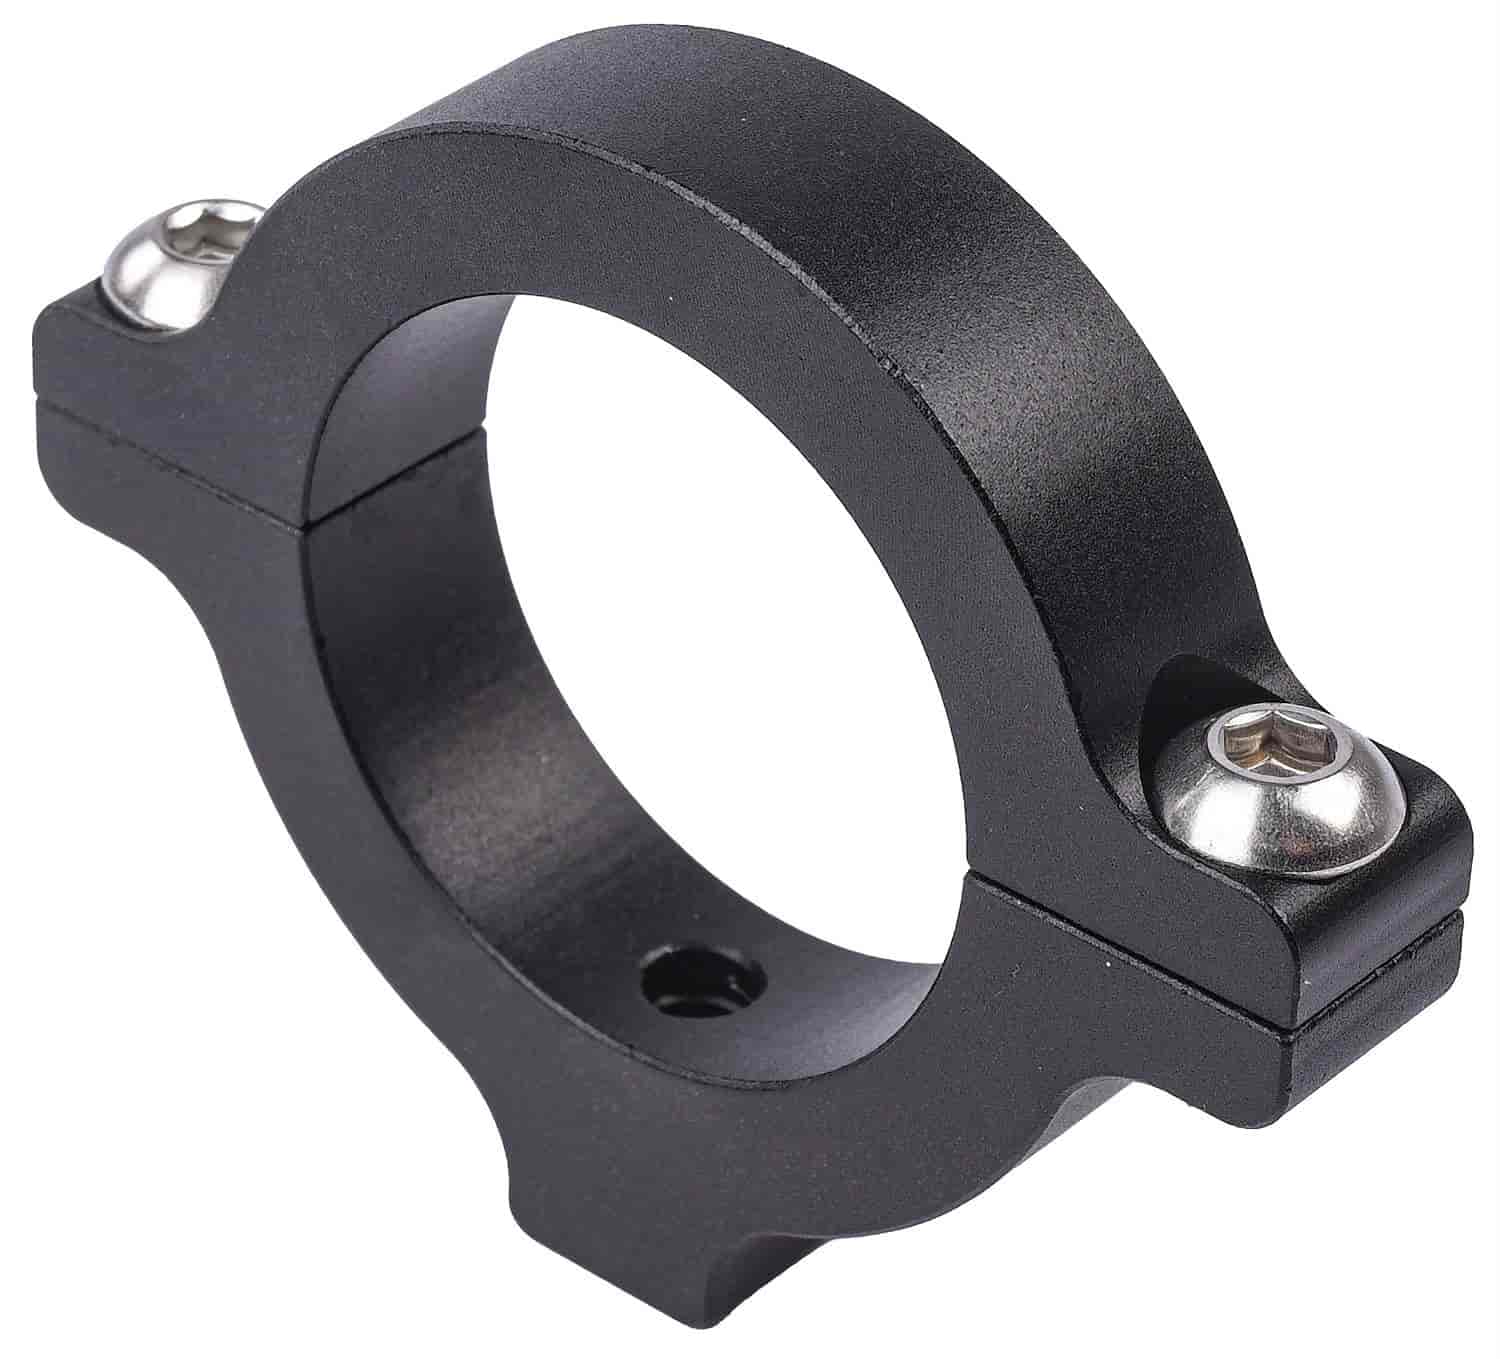 Roll Bar Accessory Clamp For 1.500 in. O.D.